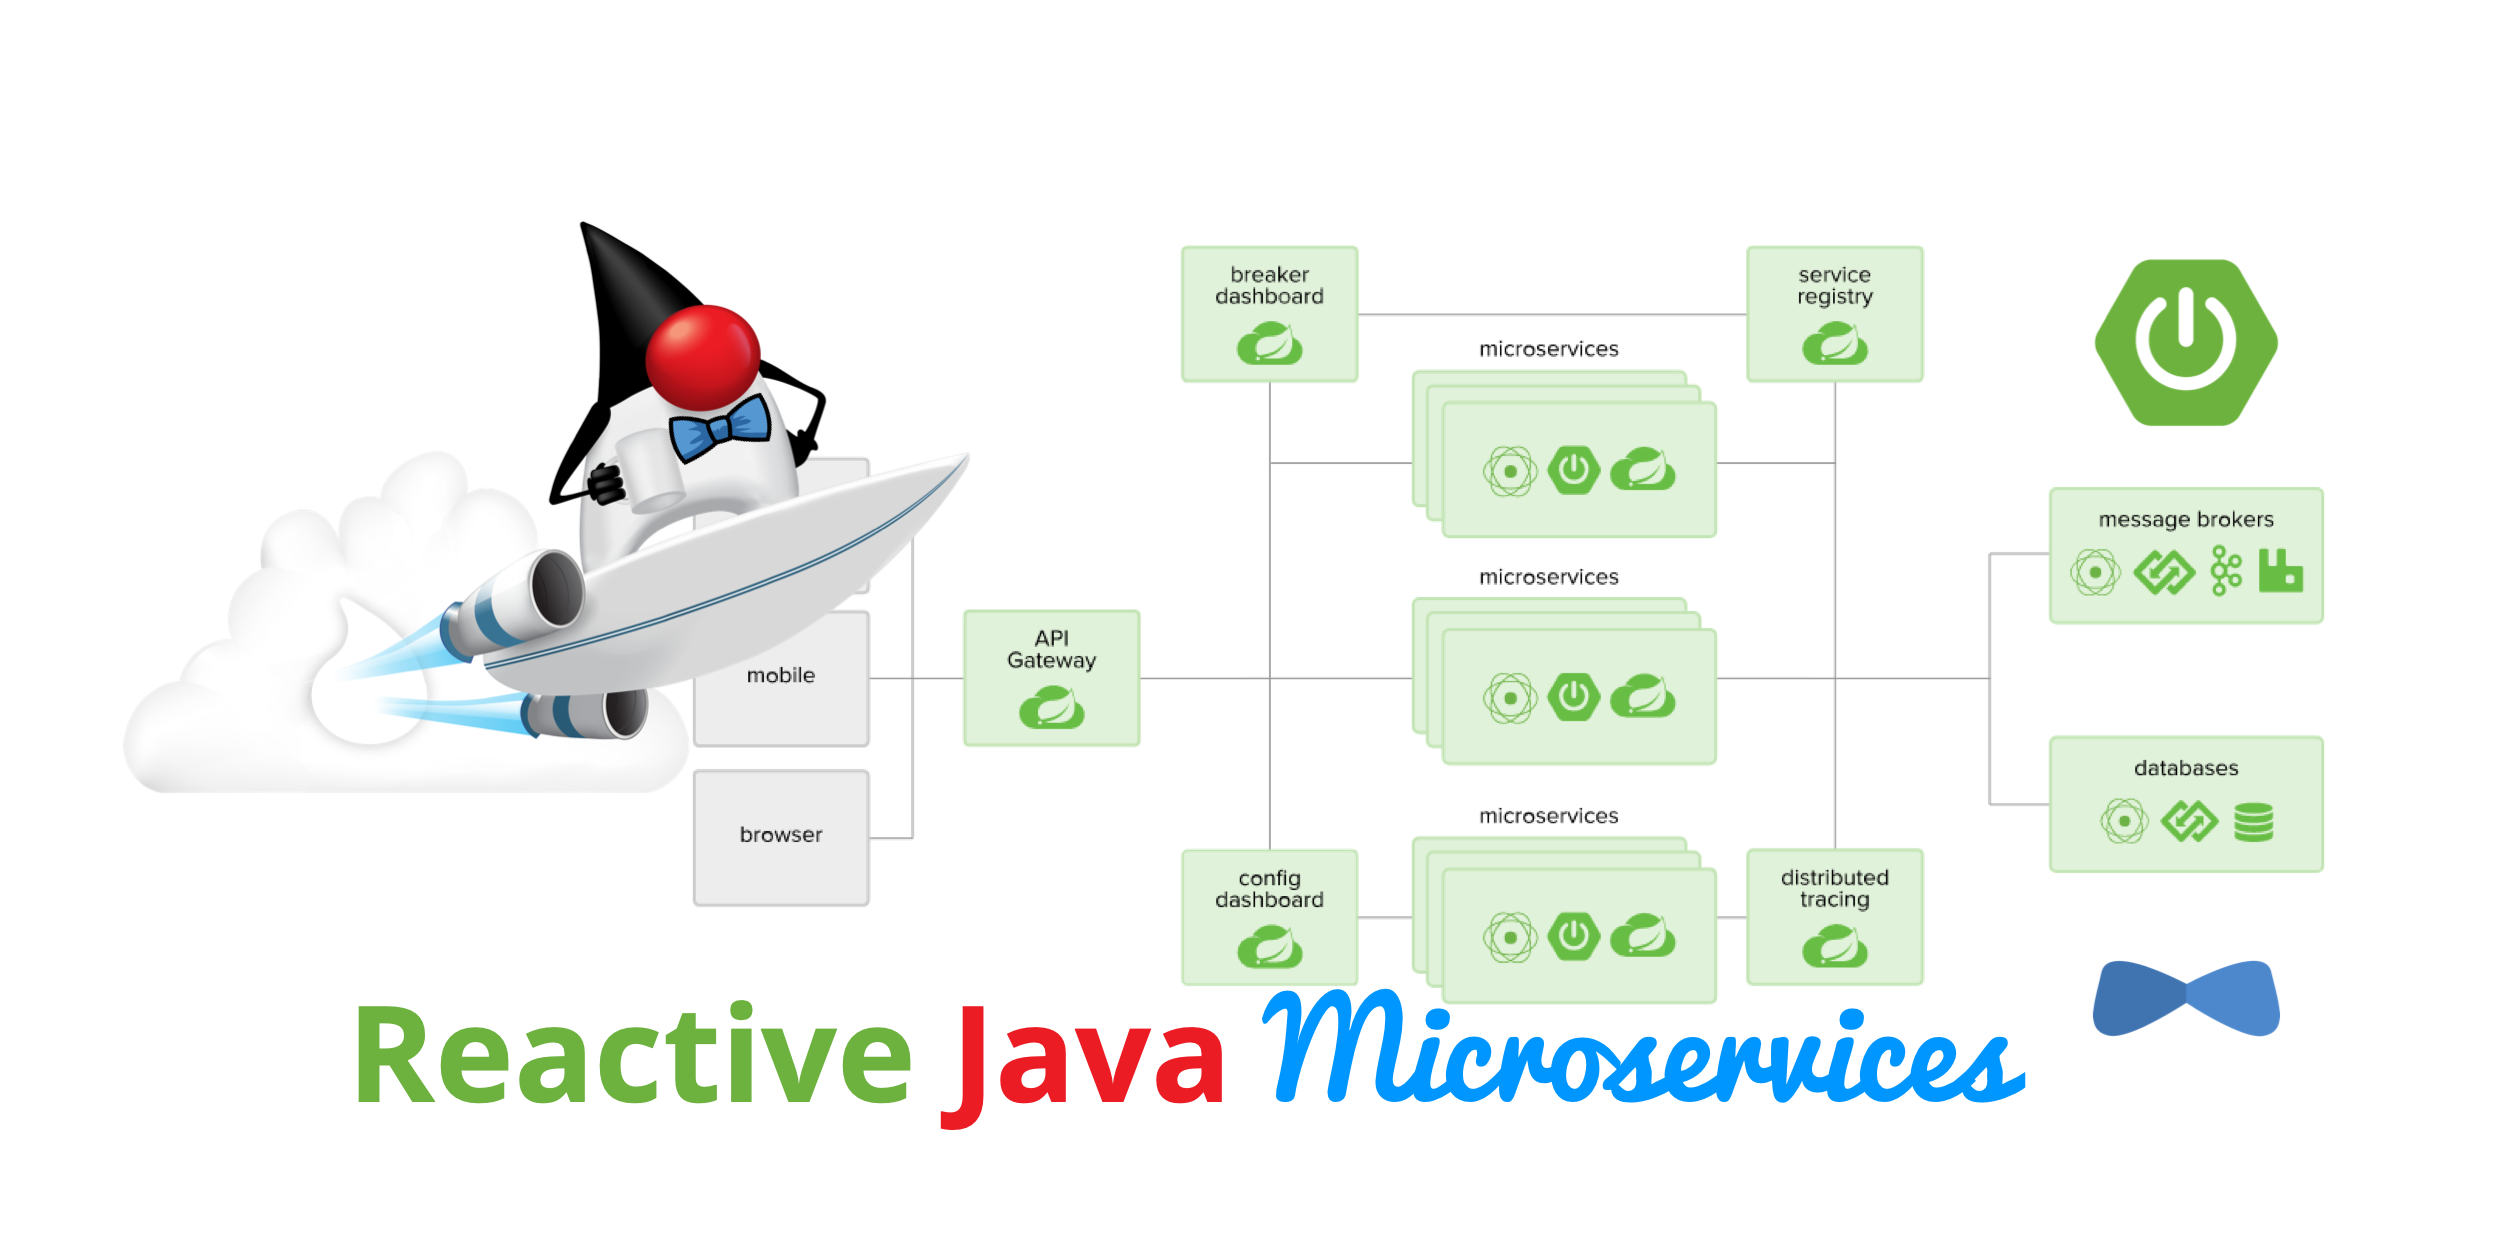 Reactive Java Microservices with Spring Boot and JHipster